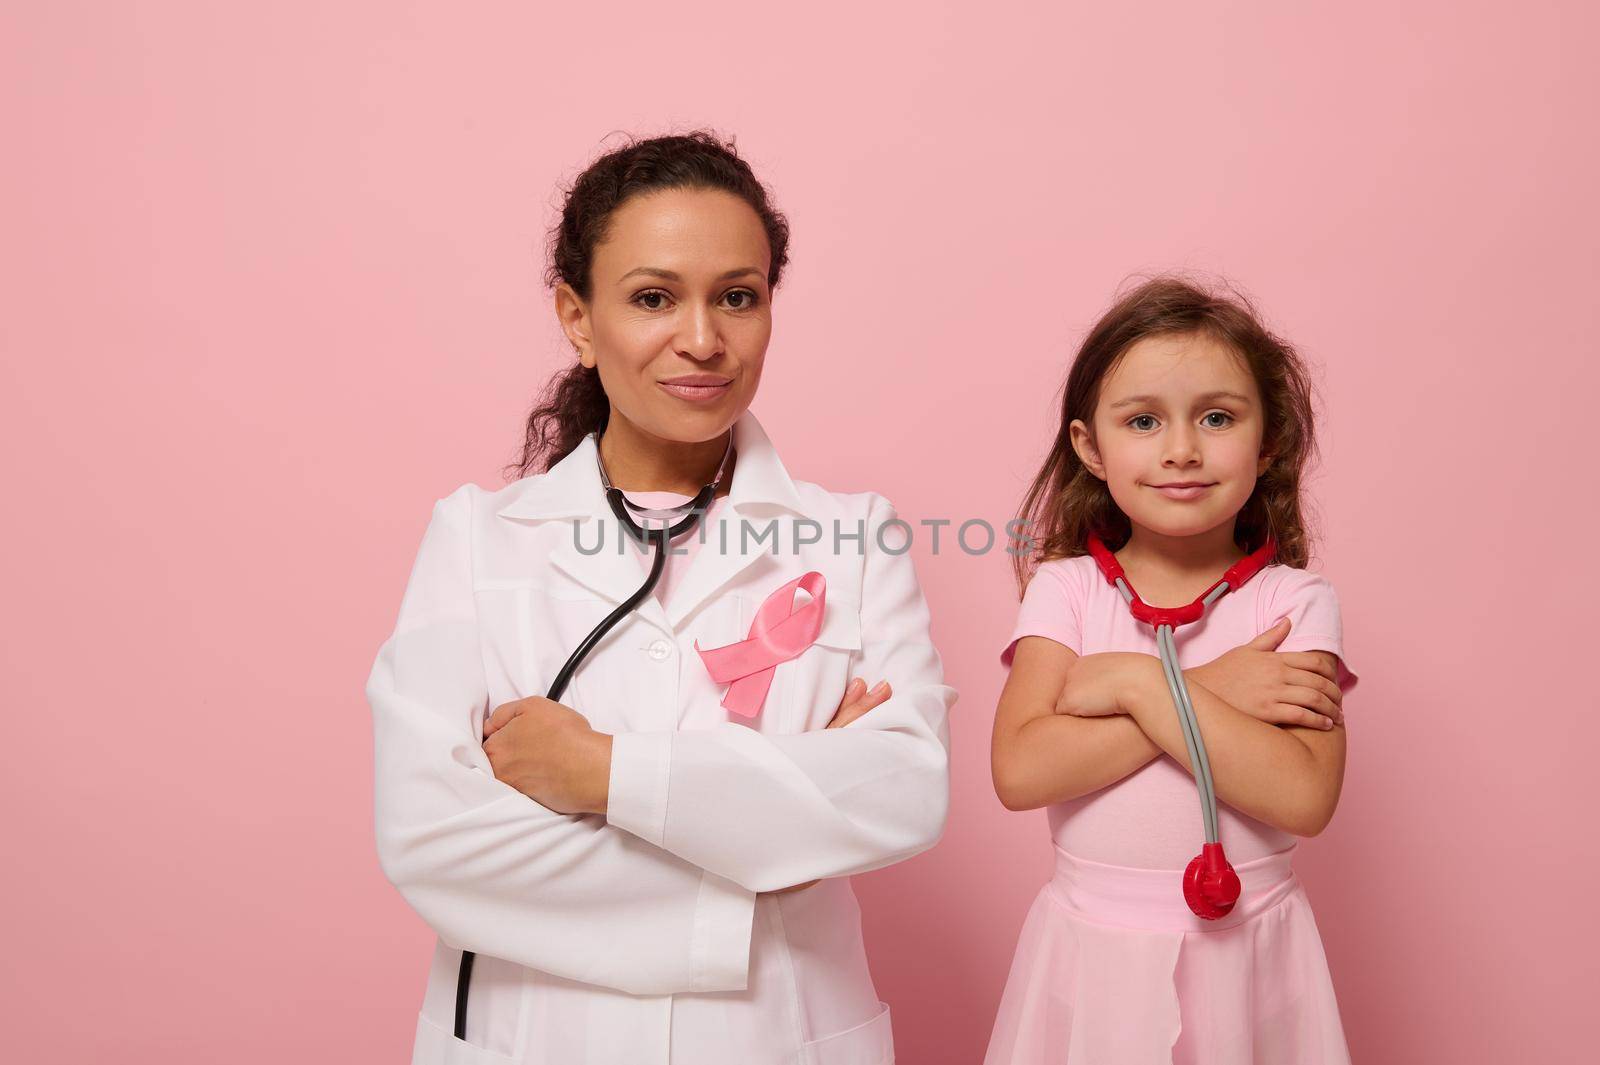 Gorgeous woman doctor in white medical gown stands next to a cute little girl in pink, both with crosses arms on chest and wearing a pink ribbon, symbol of Breast Cancer Awareness Day. Medical concept